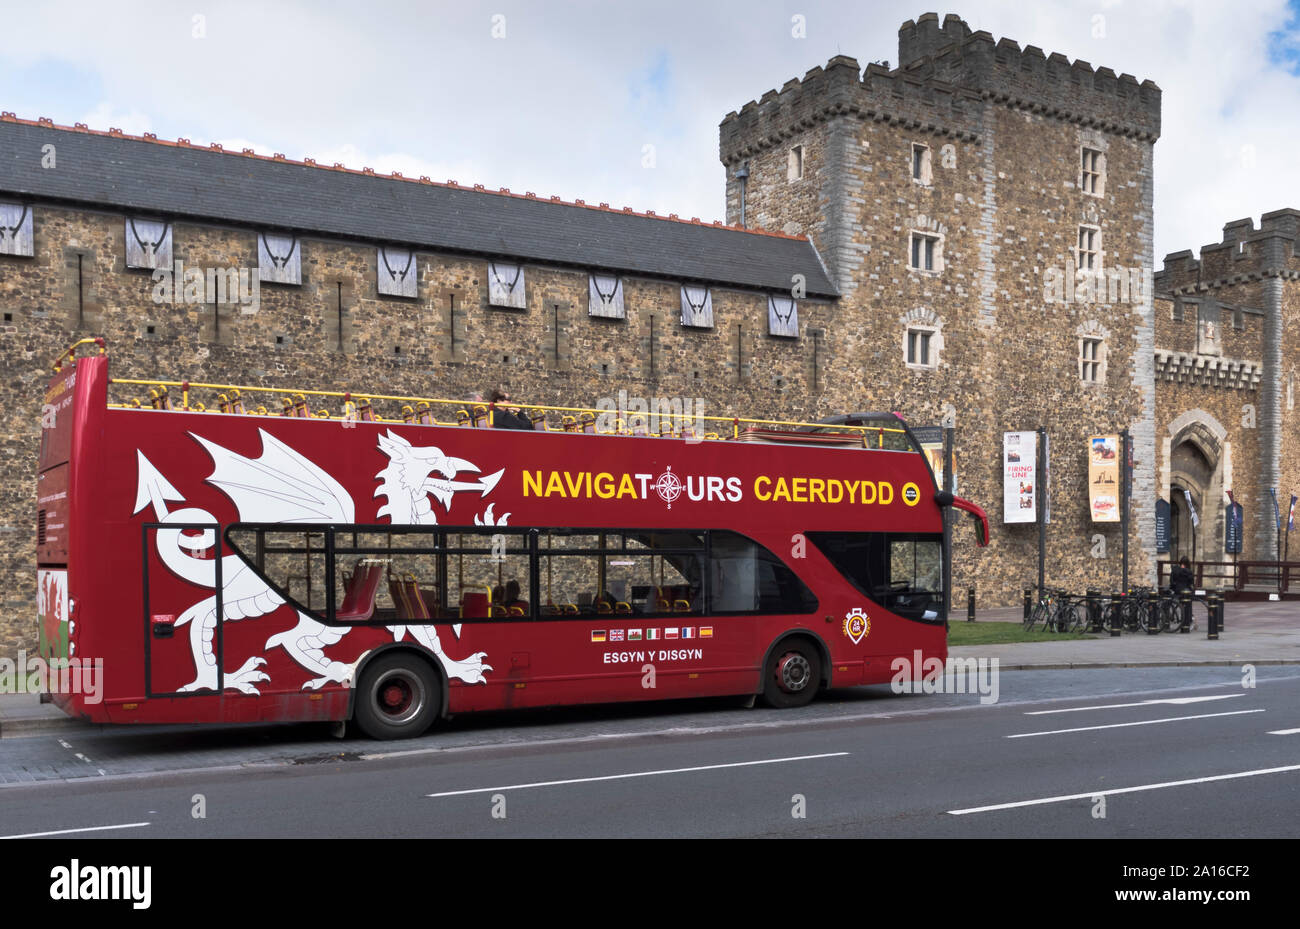 Dh il Castello di Cardiff Cardiff Galles Opentop tour bus double decker sightseeing bus turistici open top Foto Stock